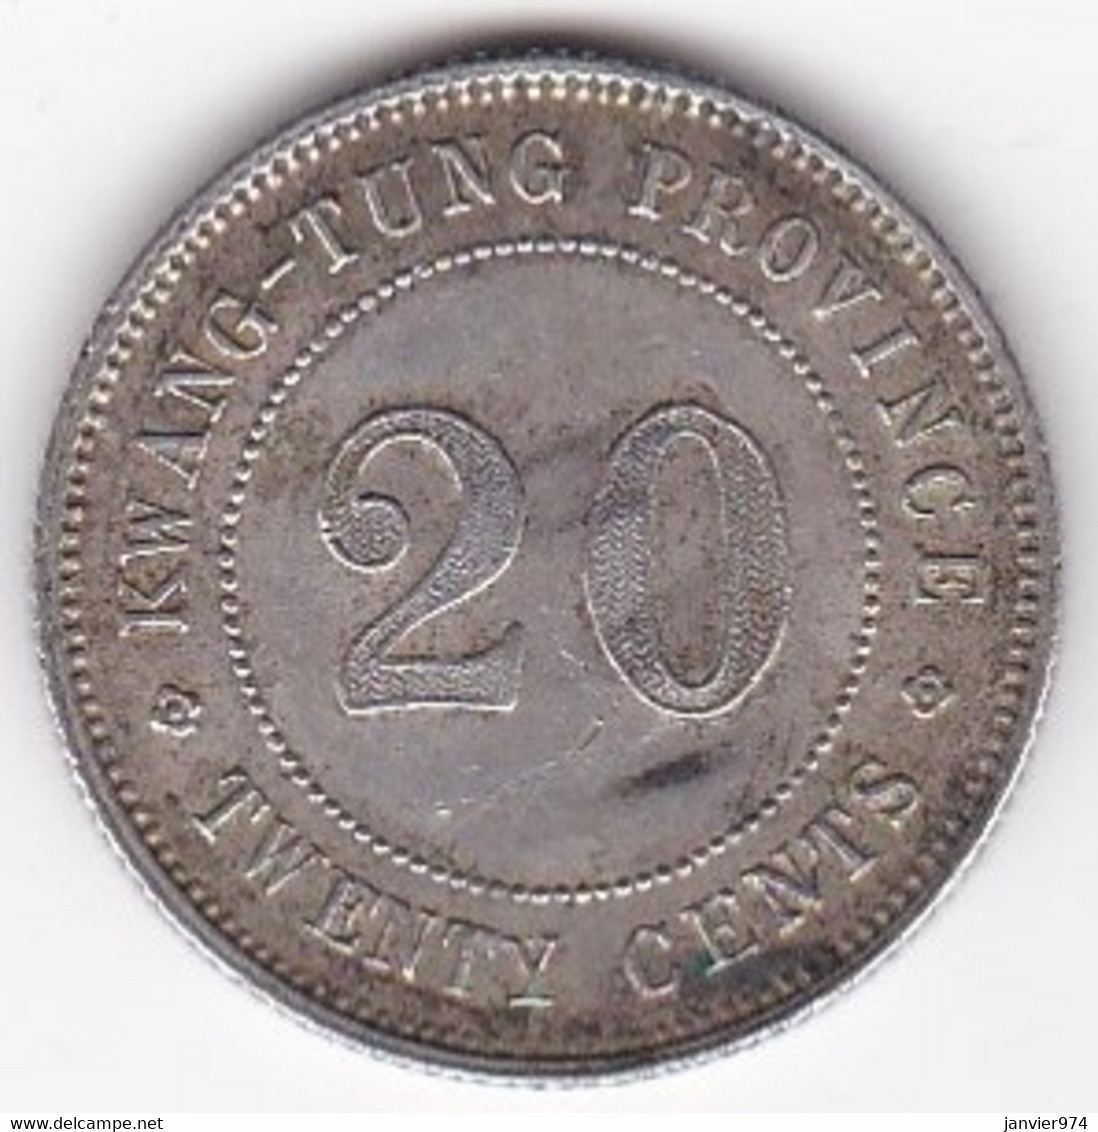 Chine Kwangtung Province. 20 Cents Year 9 - 1920 , En Argent. Y# 423 - China